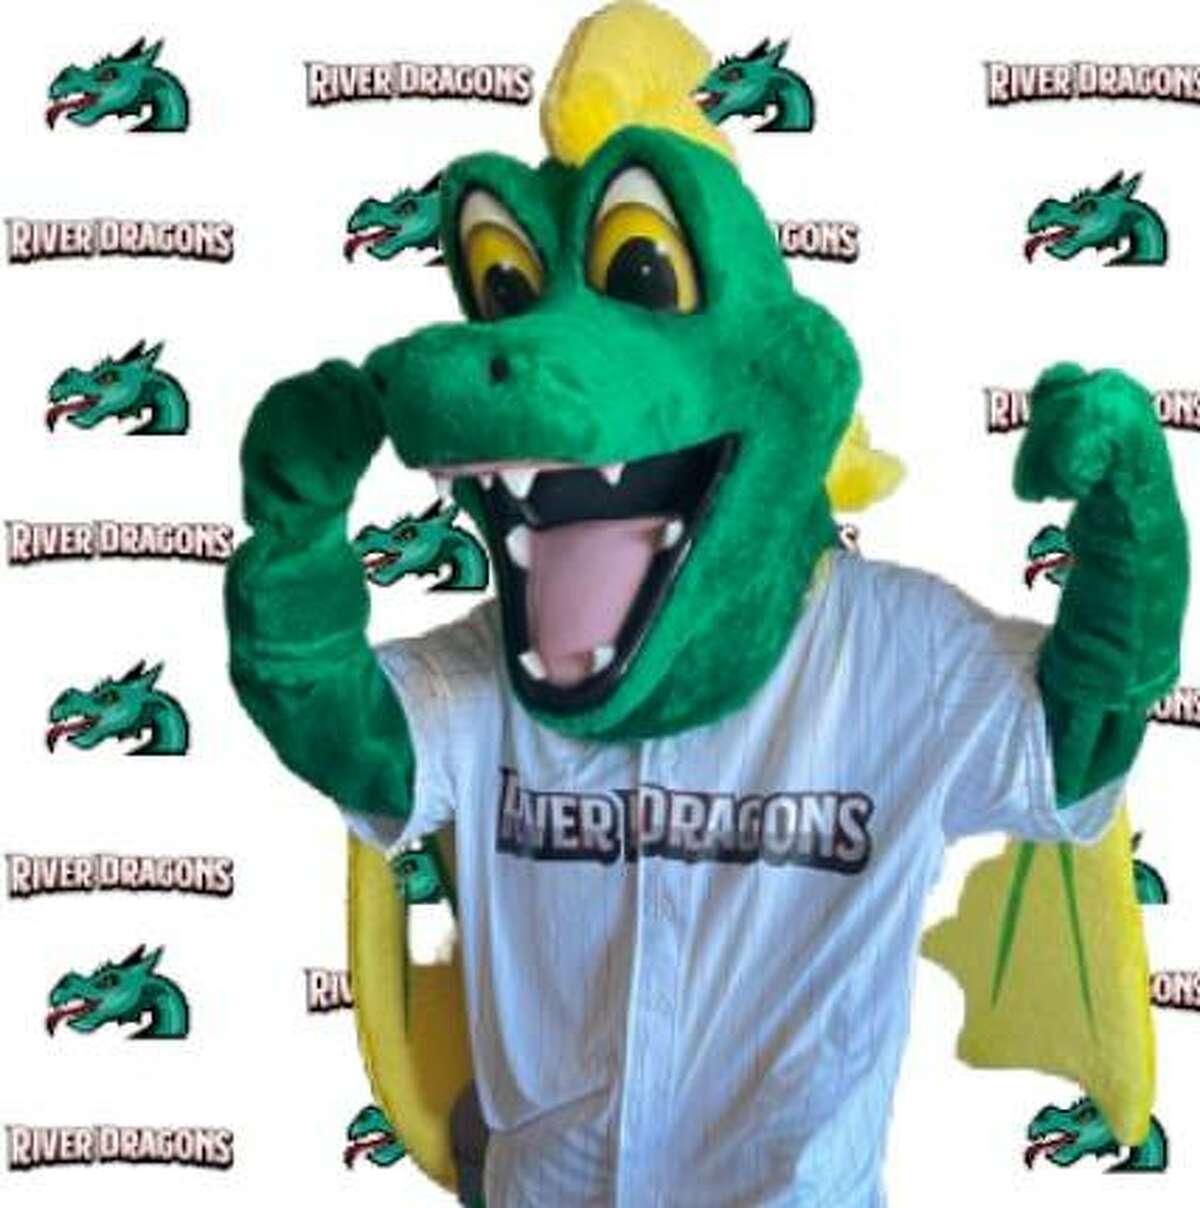 Wednesday come out between 4-6 p.m. and meet the “2021 Alton River Dragons at Catdaddy’s in Downtown Alton.” Live music from Flip the Frog will entertain and Smash from the BIG Z is broadcasting live. It will be fun and there will be River Dragons Prizes at “Meet The River Dragons Night, at 203 W. 3rd St., in Alton. Free, open to the public.